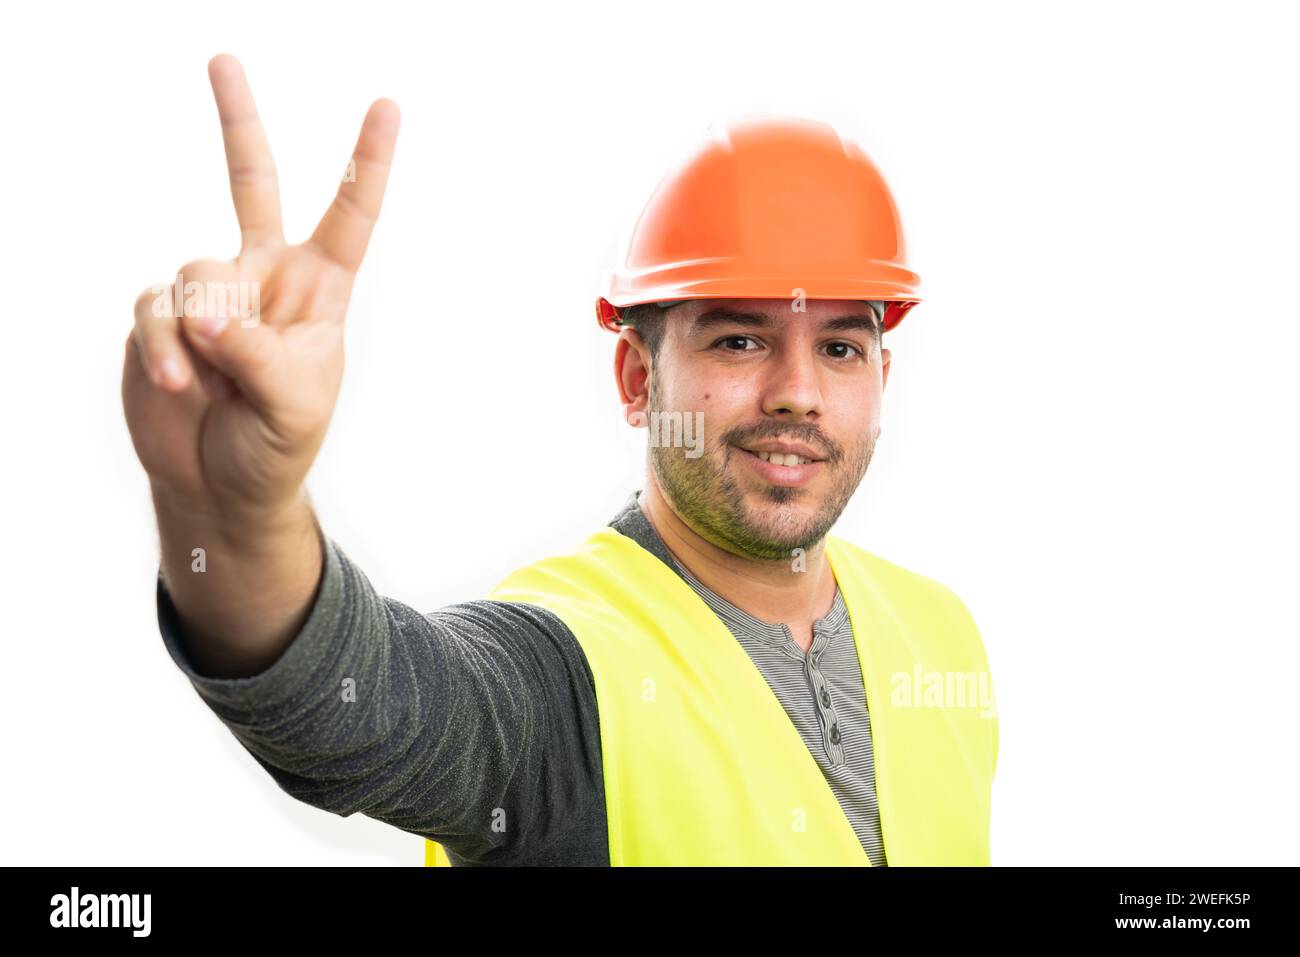 Friendly adult builder man smiling showing peace or victory sign with fingers wearing fluorescent vest and orange hardhat isolated on white studio bac Stock Photo